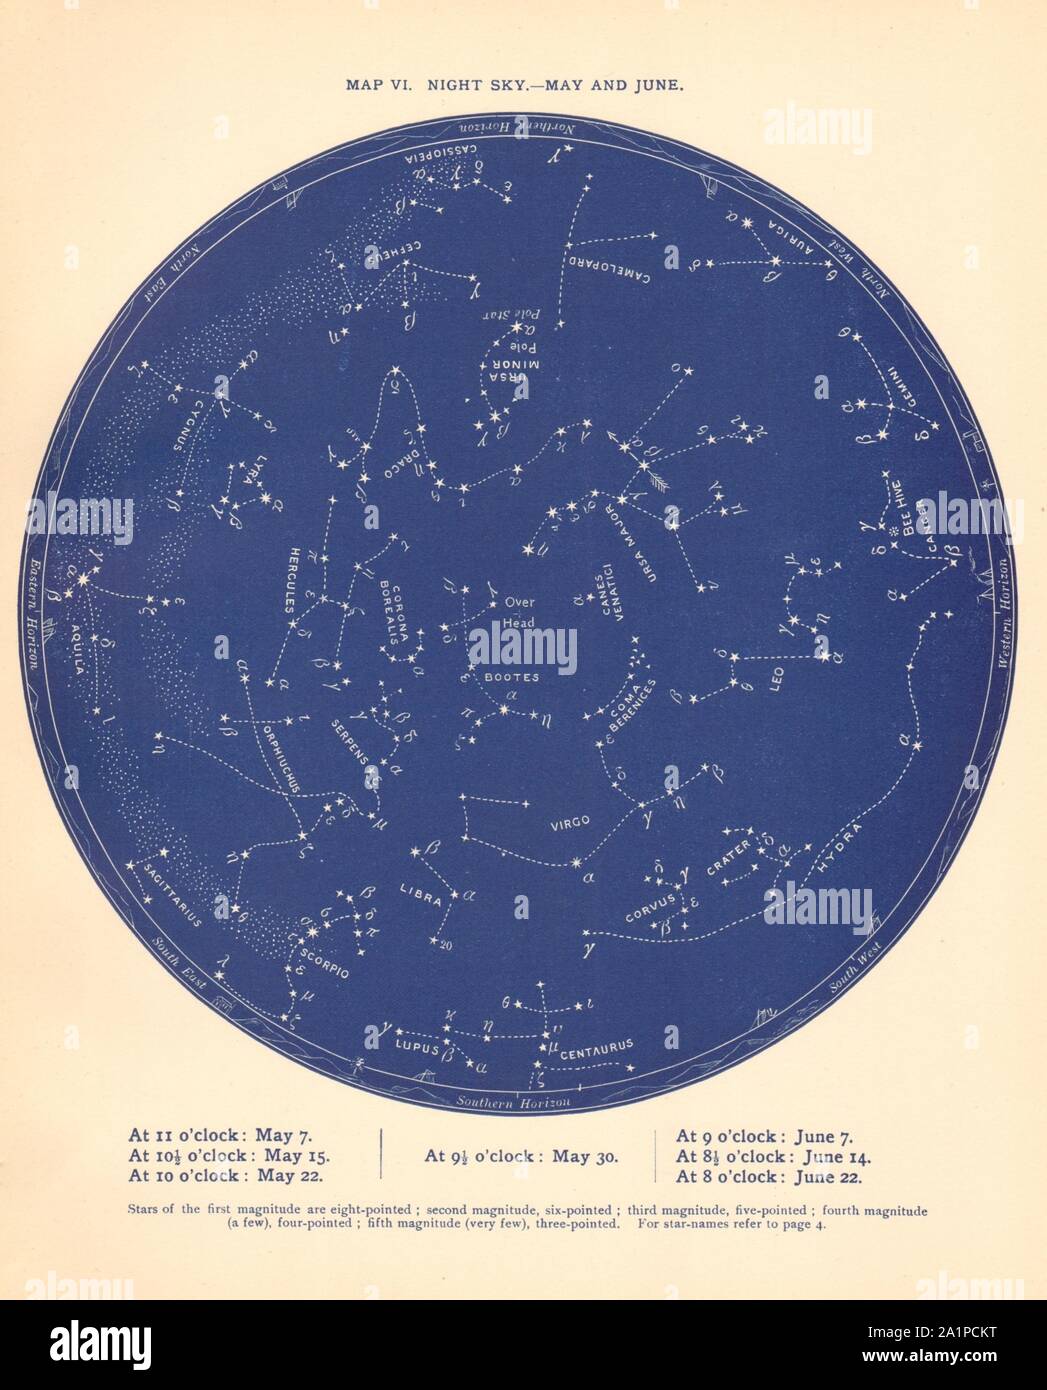 STAR MAP VI. The Night Sky. May-June. Astronomy. PROCTOR 1887 old antique Stock Photo